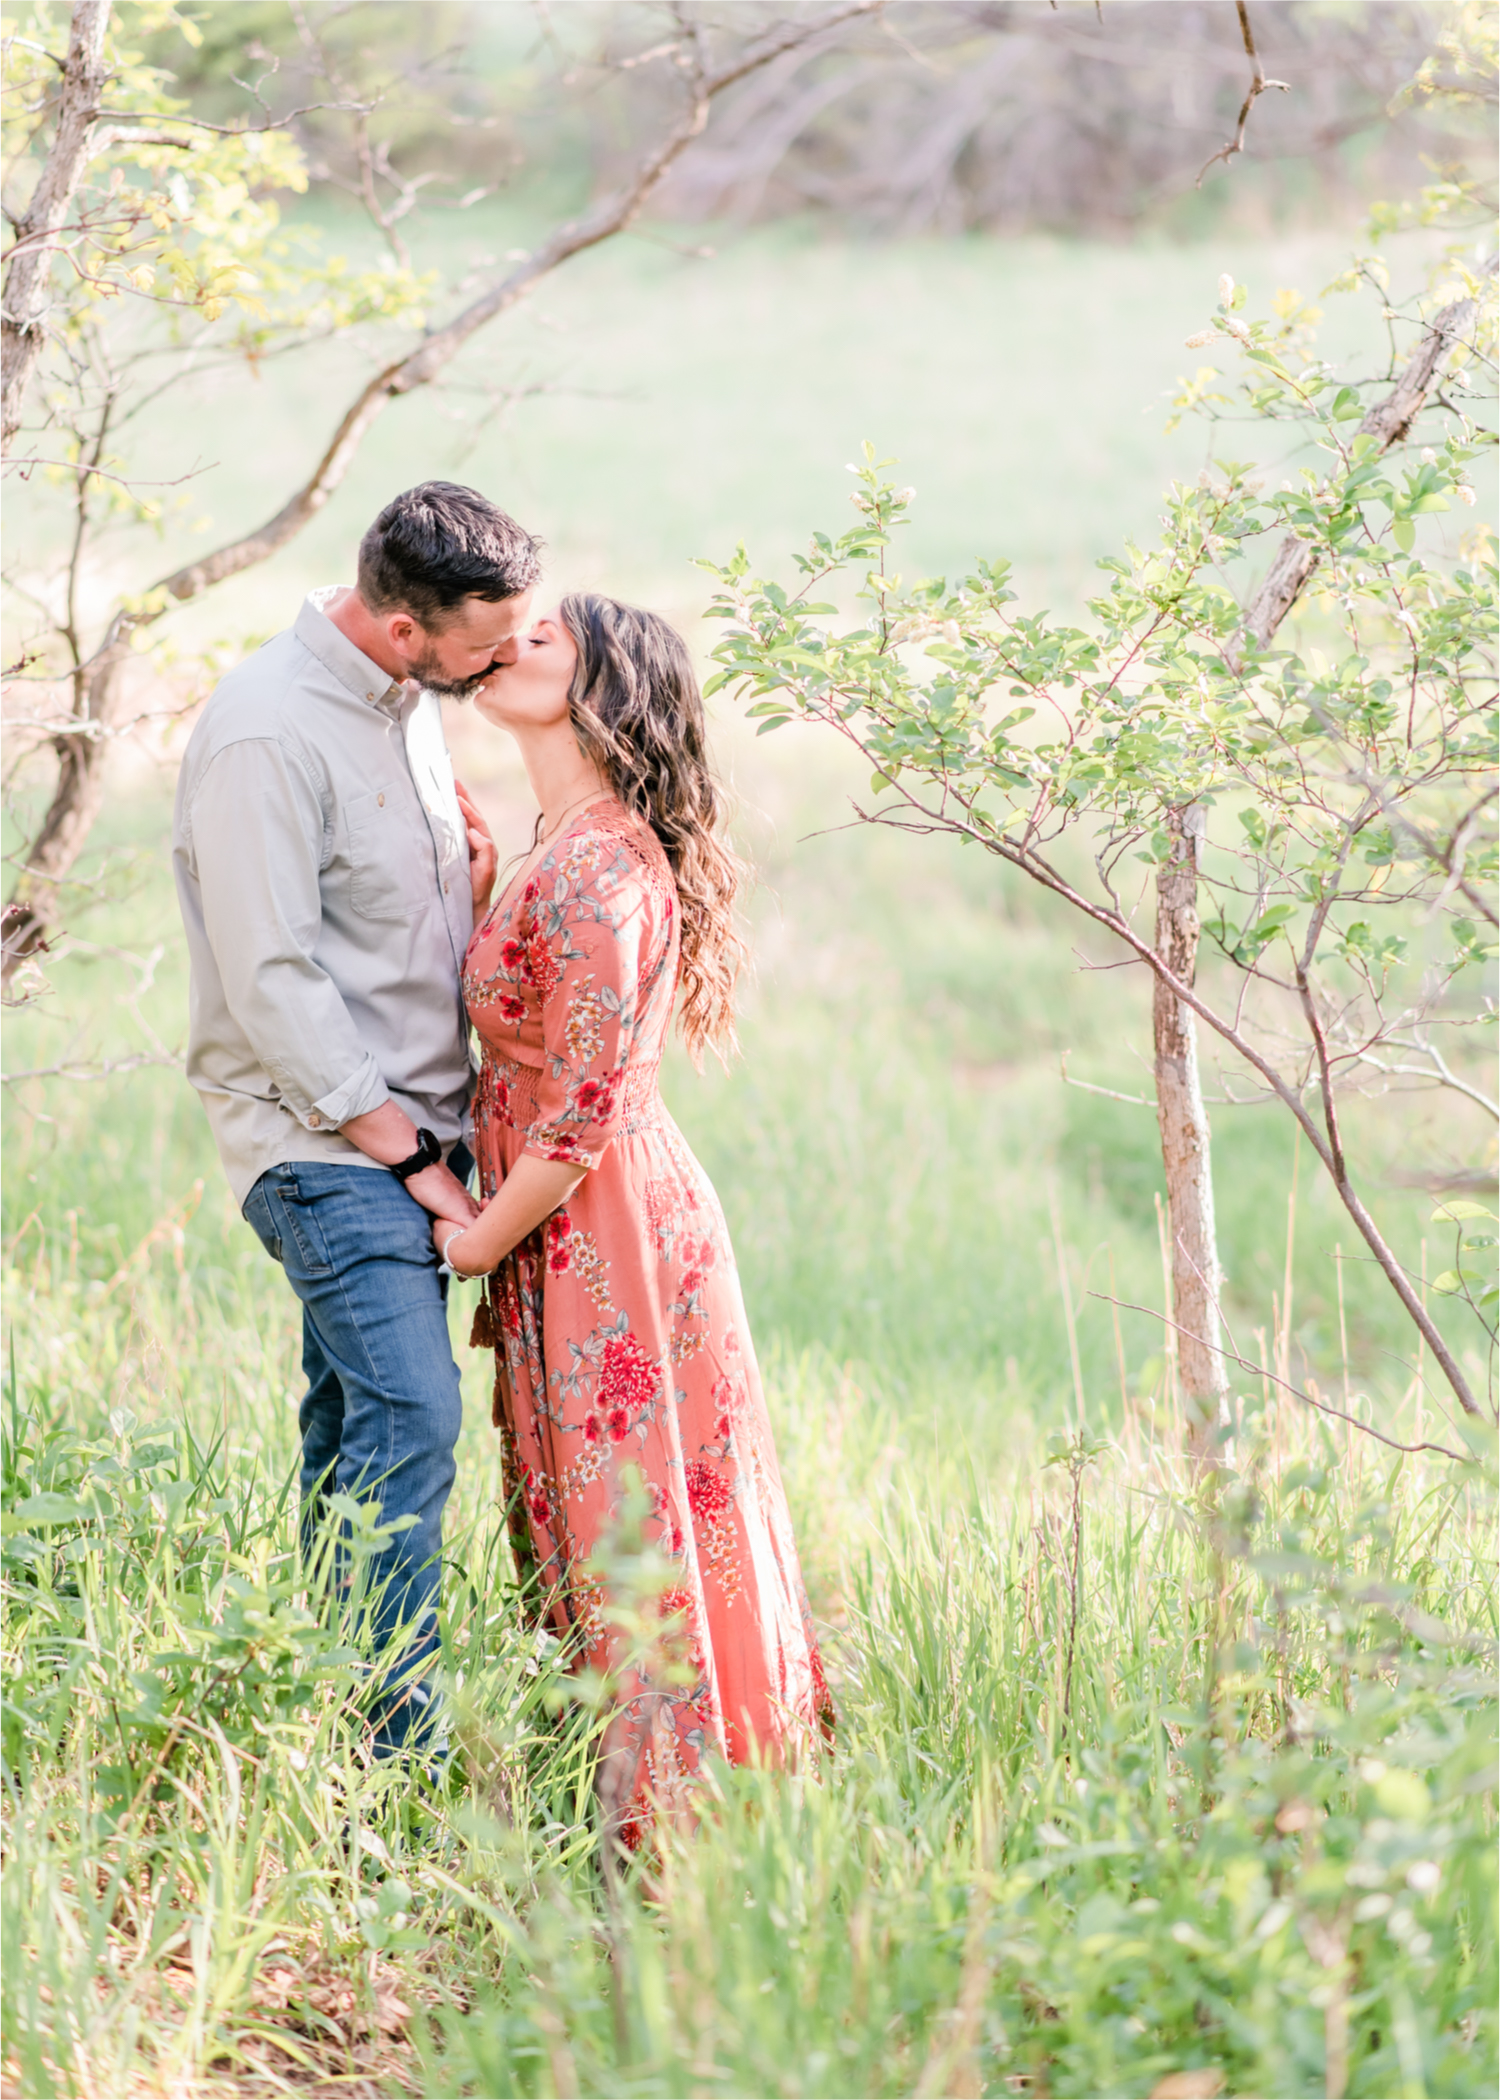 Romantic Summer Engagement at Red Rock Canyon Park in Colorado Springs | Britni Girard Photography Colorado Wedding Photographer and Videographer | Floral Dress, Green Dress, Grassy Fields, Rustic Boho Engagement